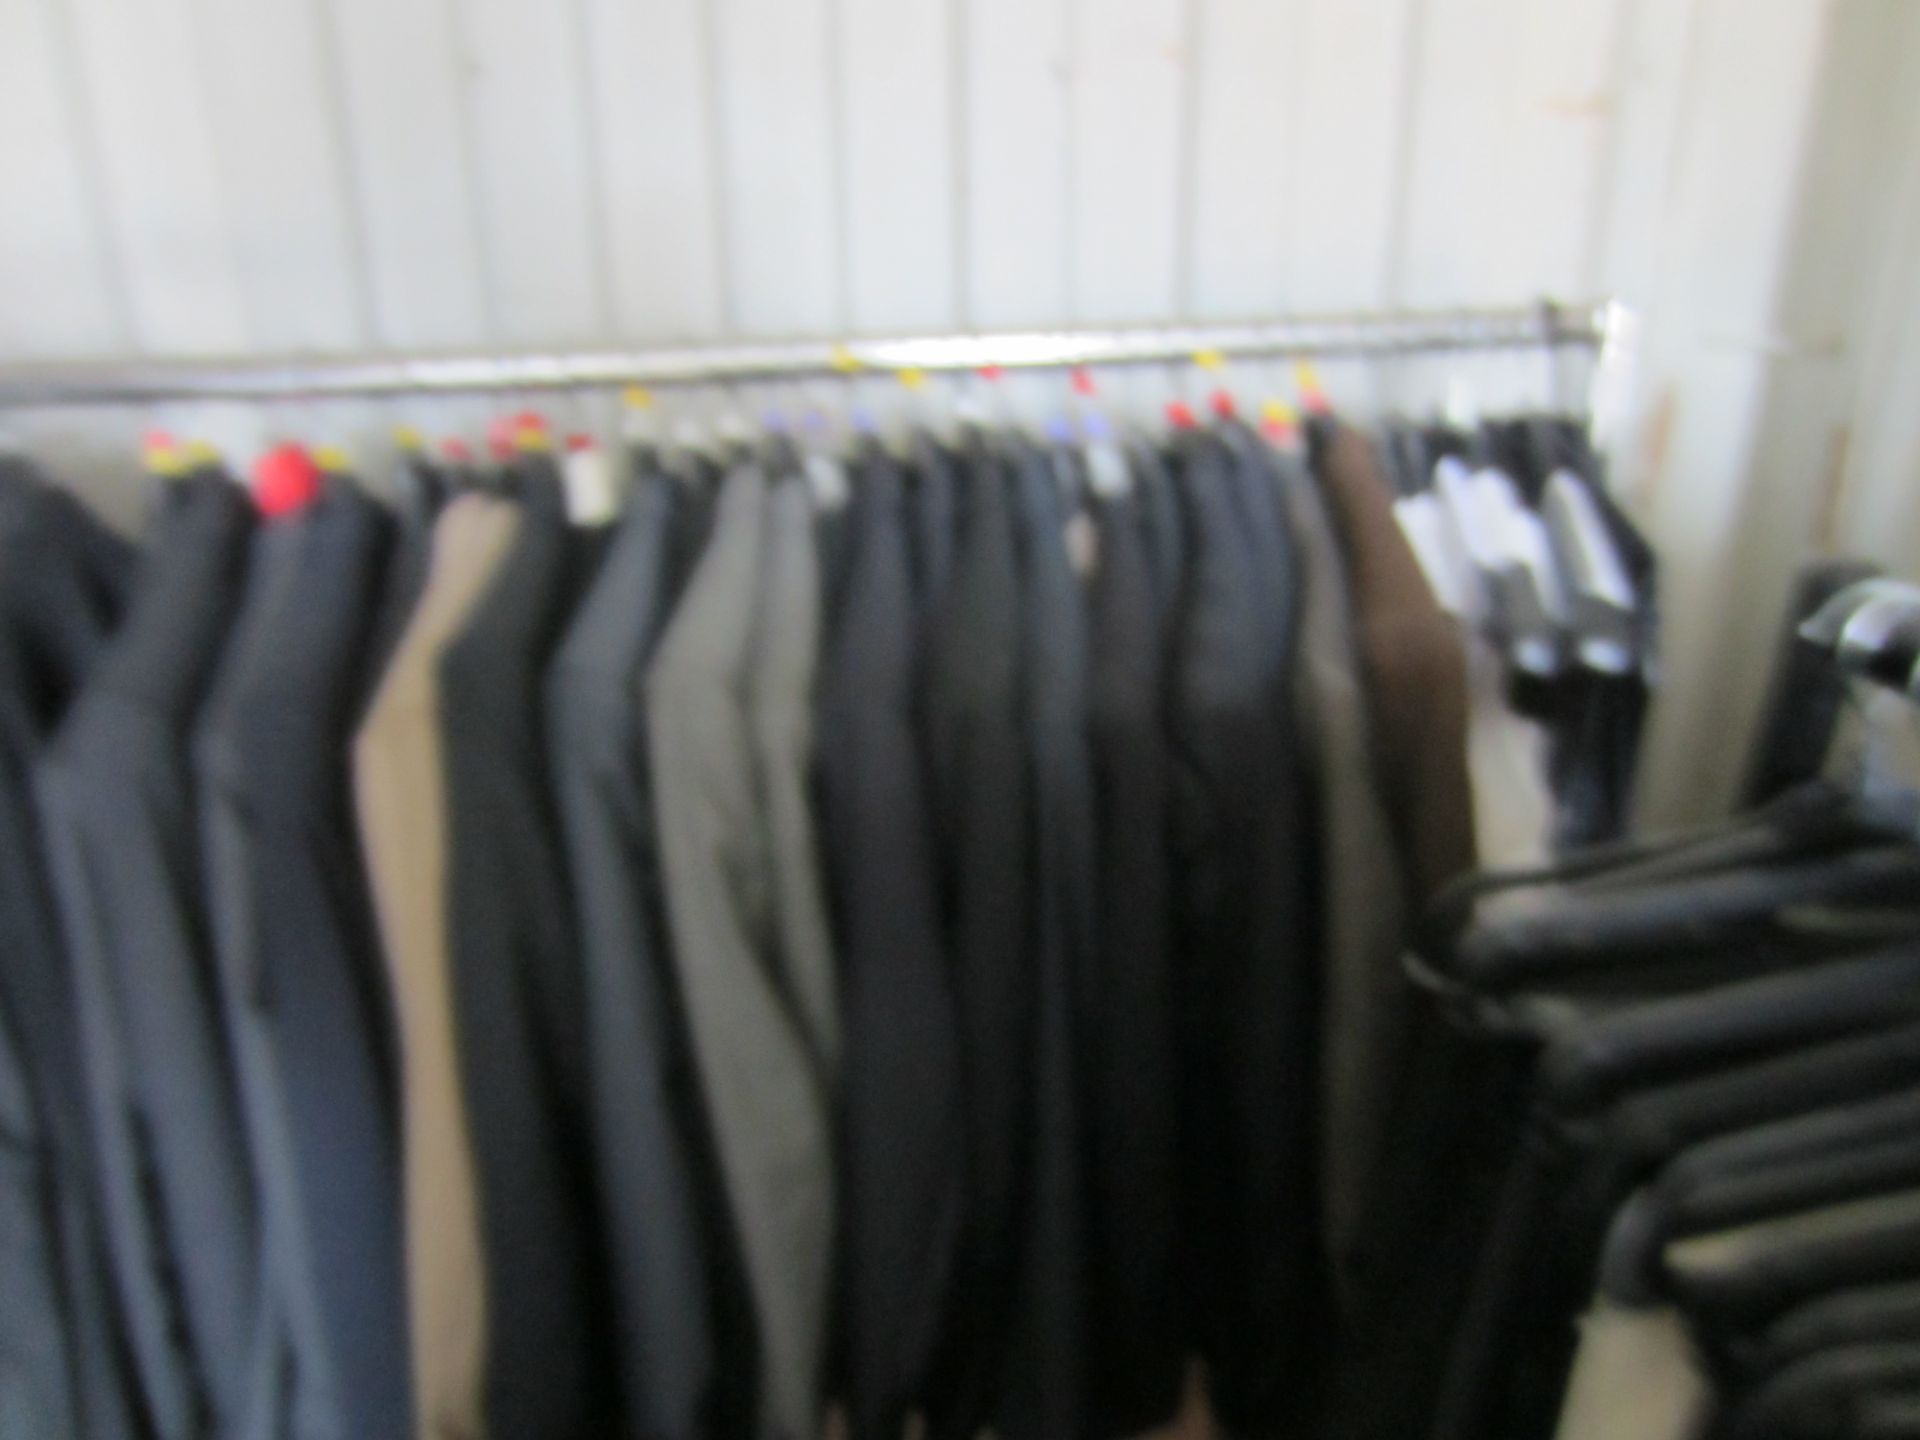 Large Quantity of Stock from a Gents Outfitters, comprising Formal Shirts, Trousers, Ties, Belts - Image 4 of 9